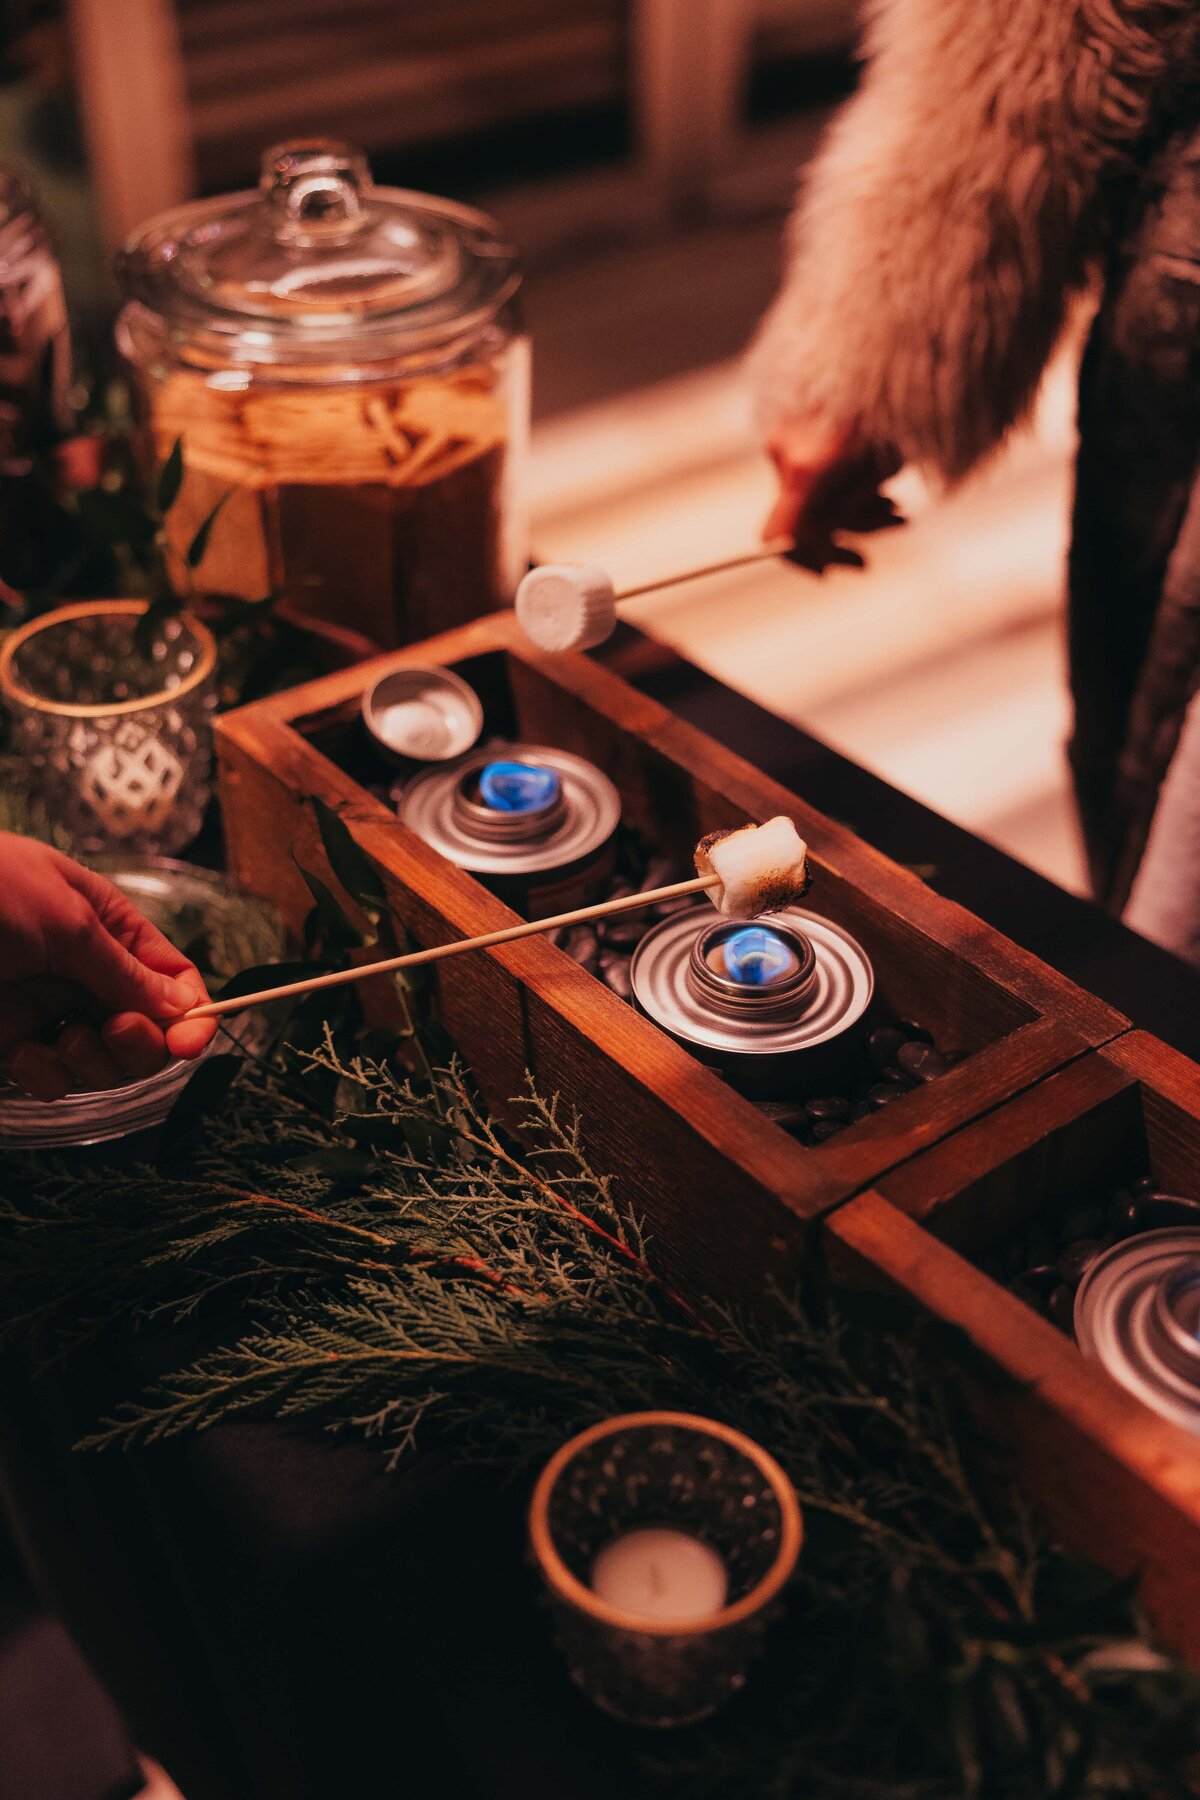 A person toasts a marshmallow over small candles at a cozy outdoor serving station adorned with greenery during an Iowa wedding.